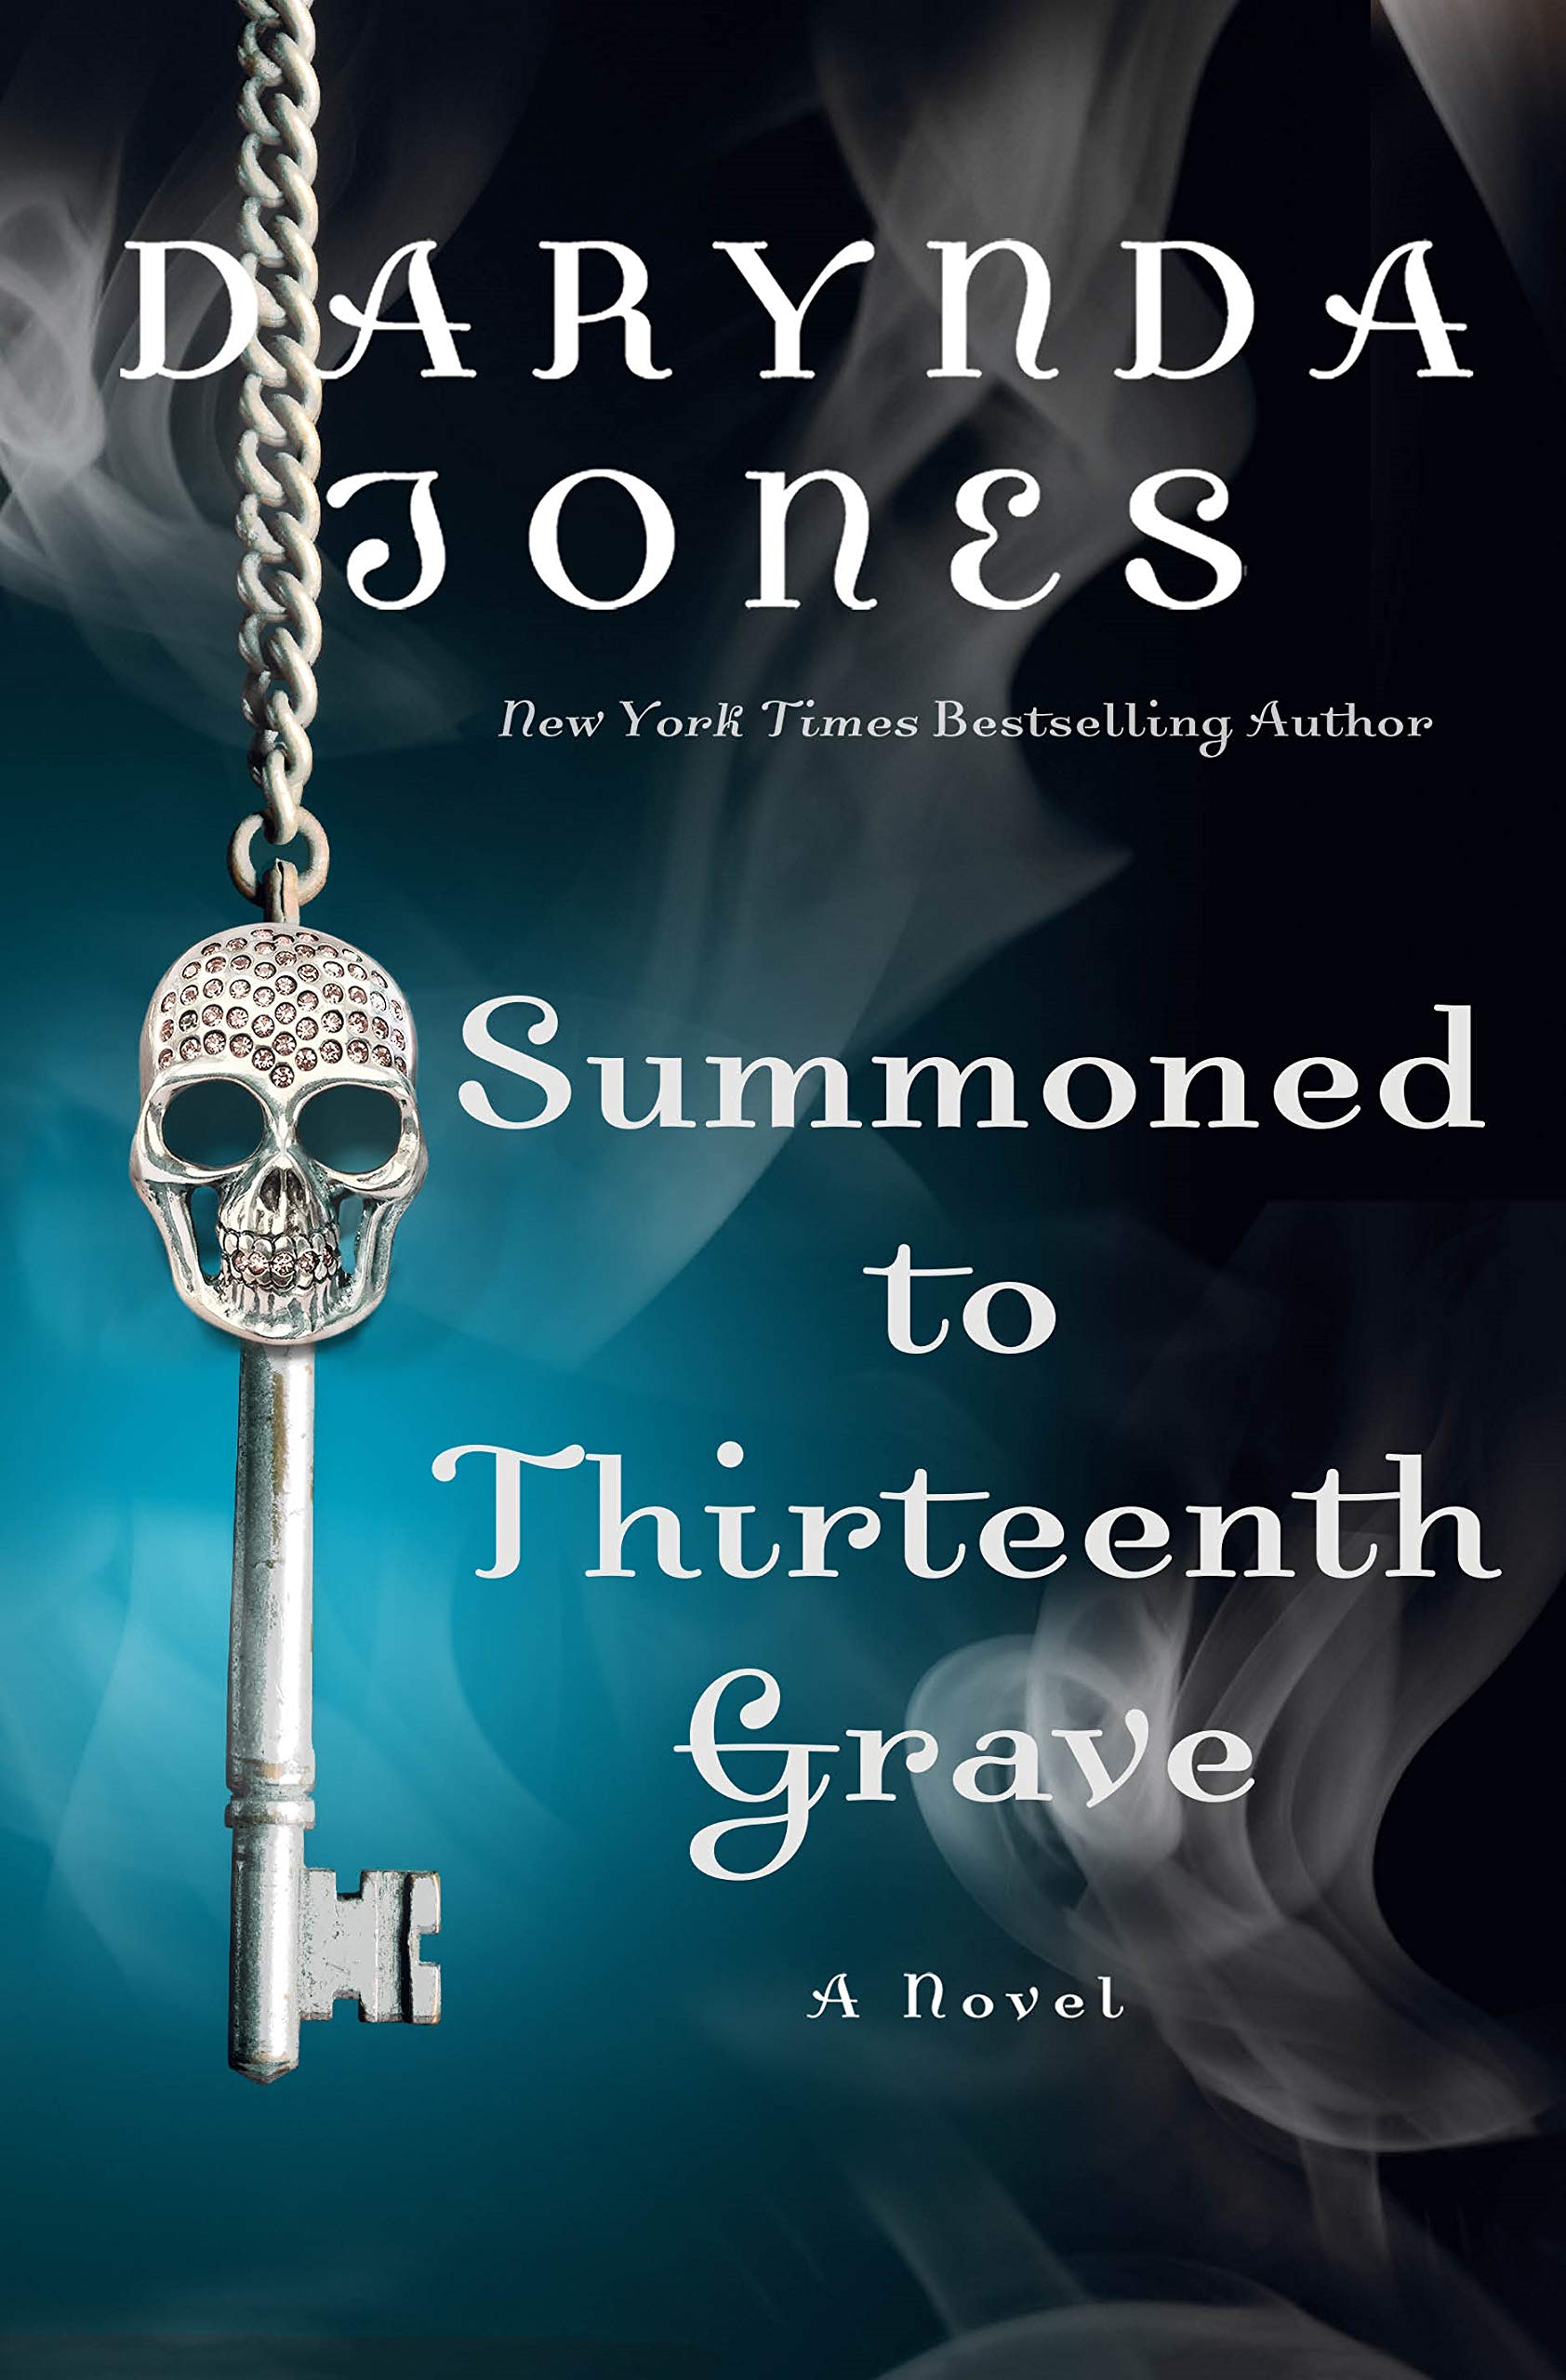 Summoned to Thirteenth Grave: A Novel